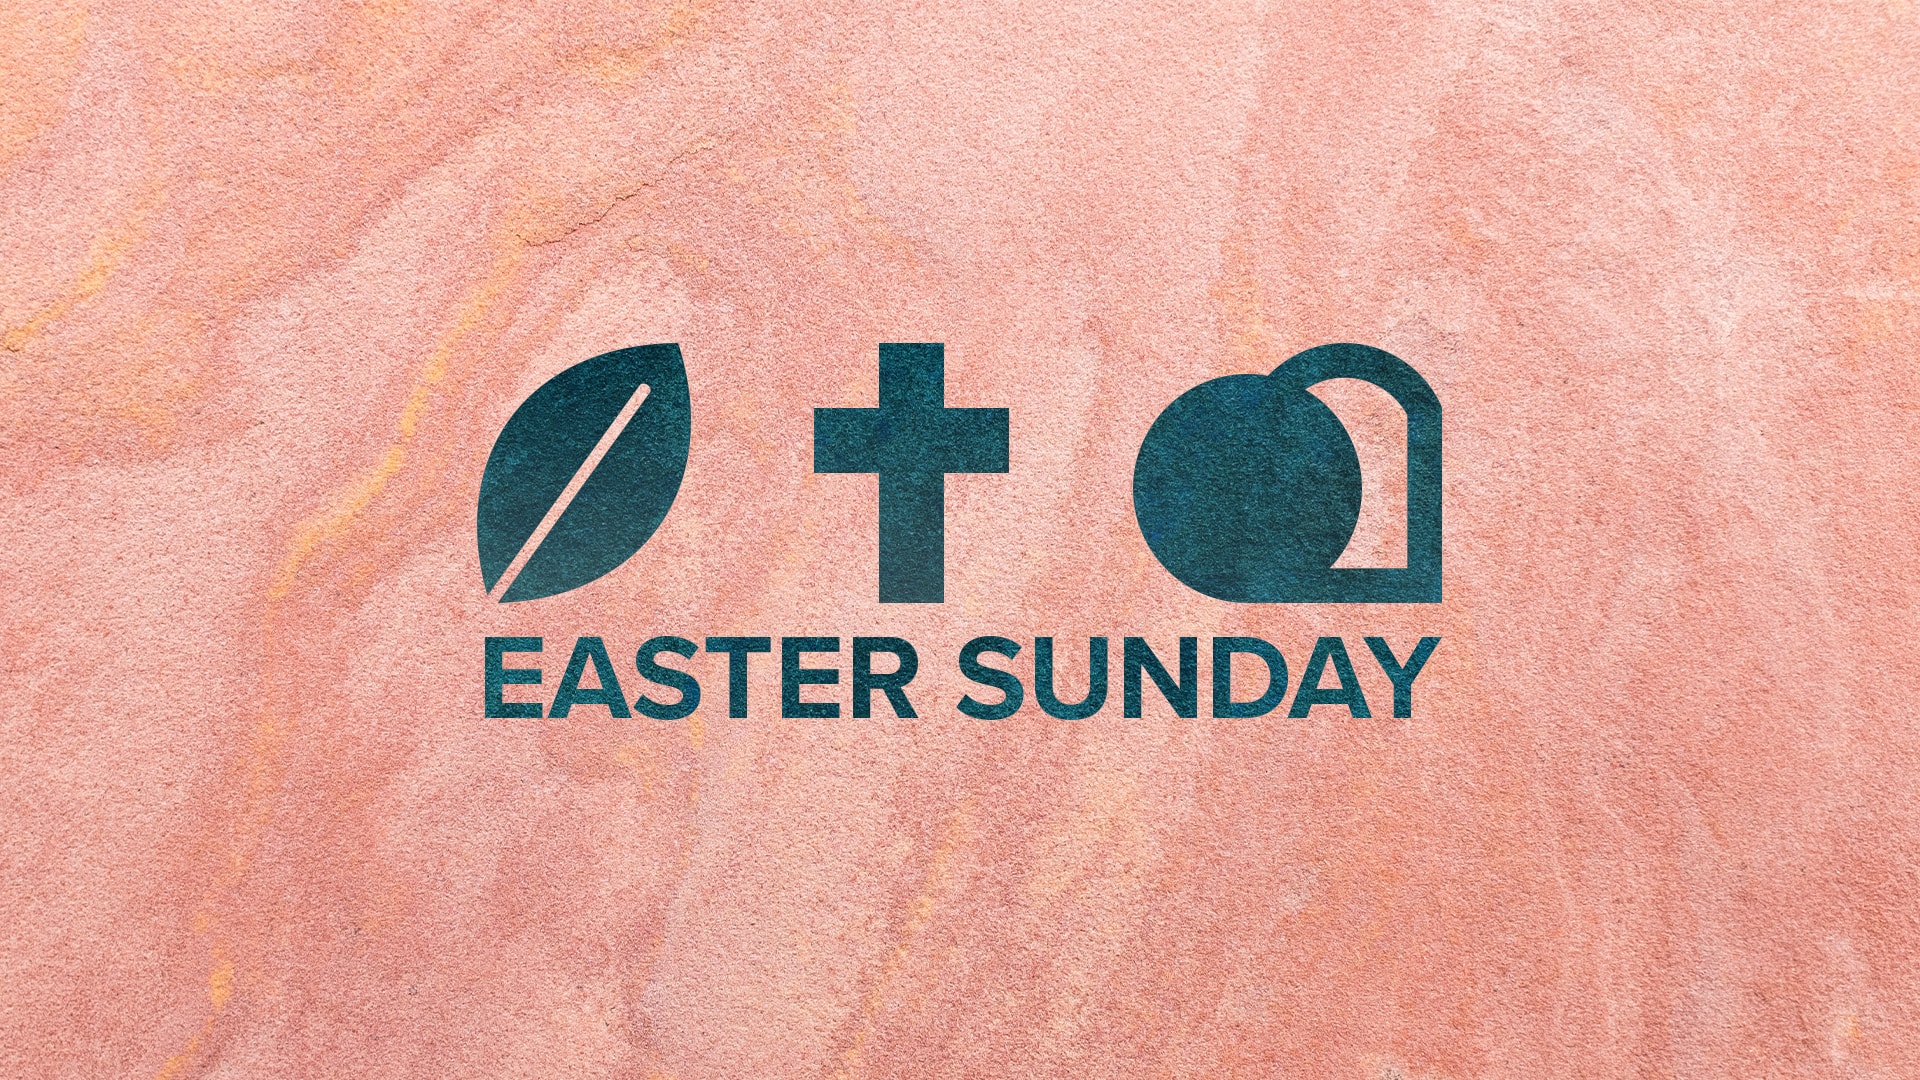 Featured image for “Easter Sunday”